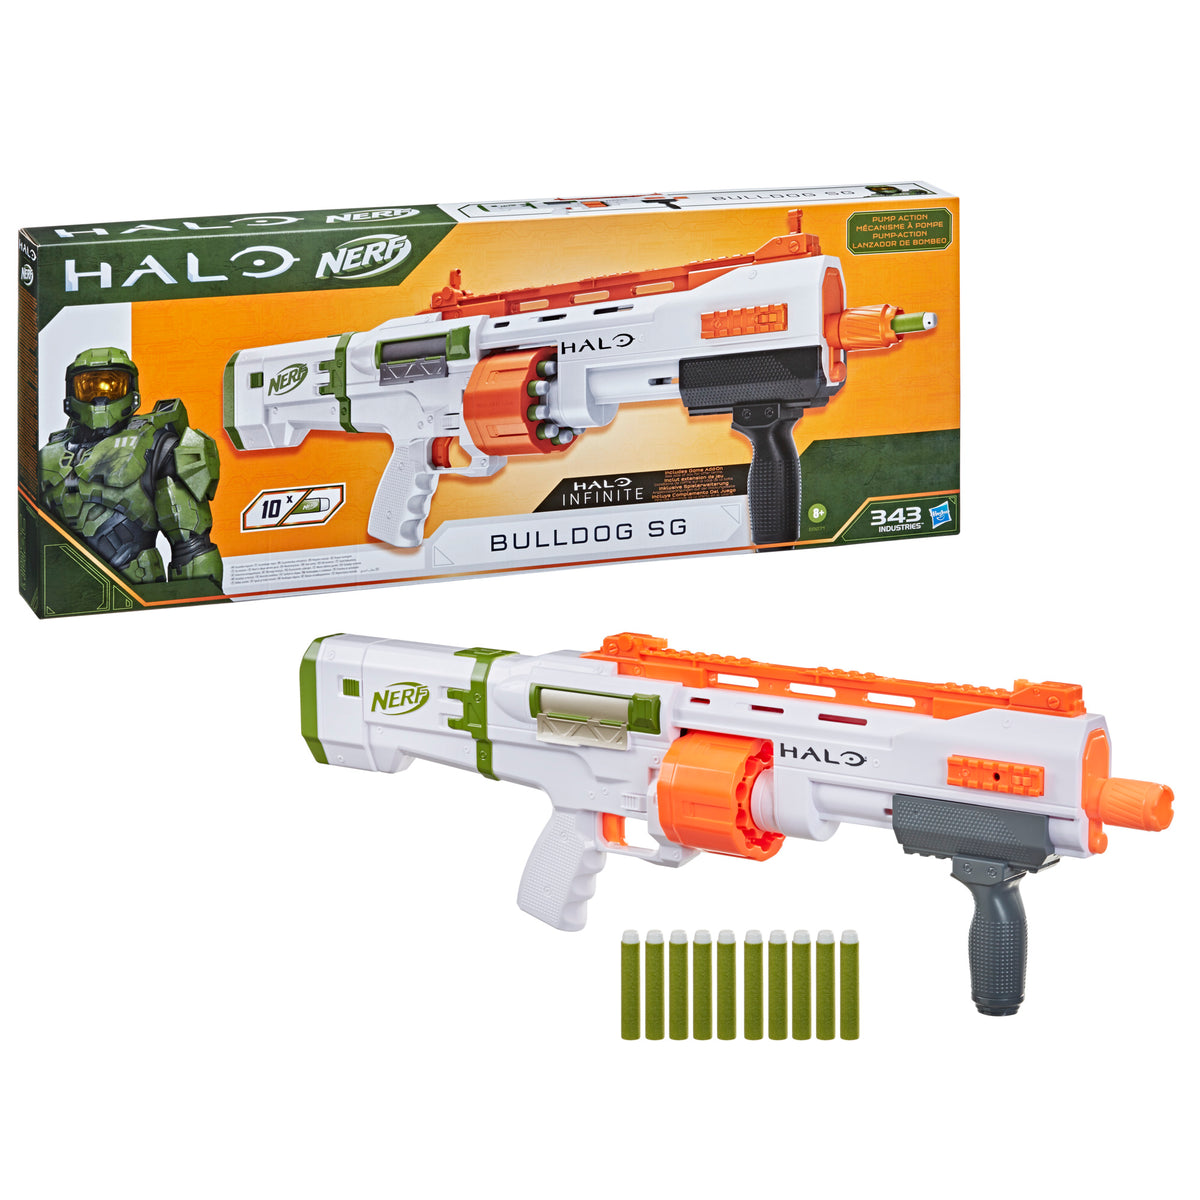 Nerf Announces Halo Infinite Mangler and Bulldog SG Blasters With DLC